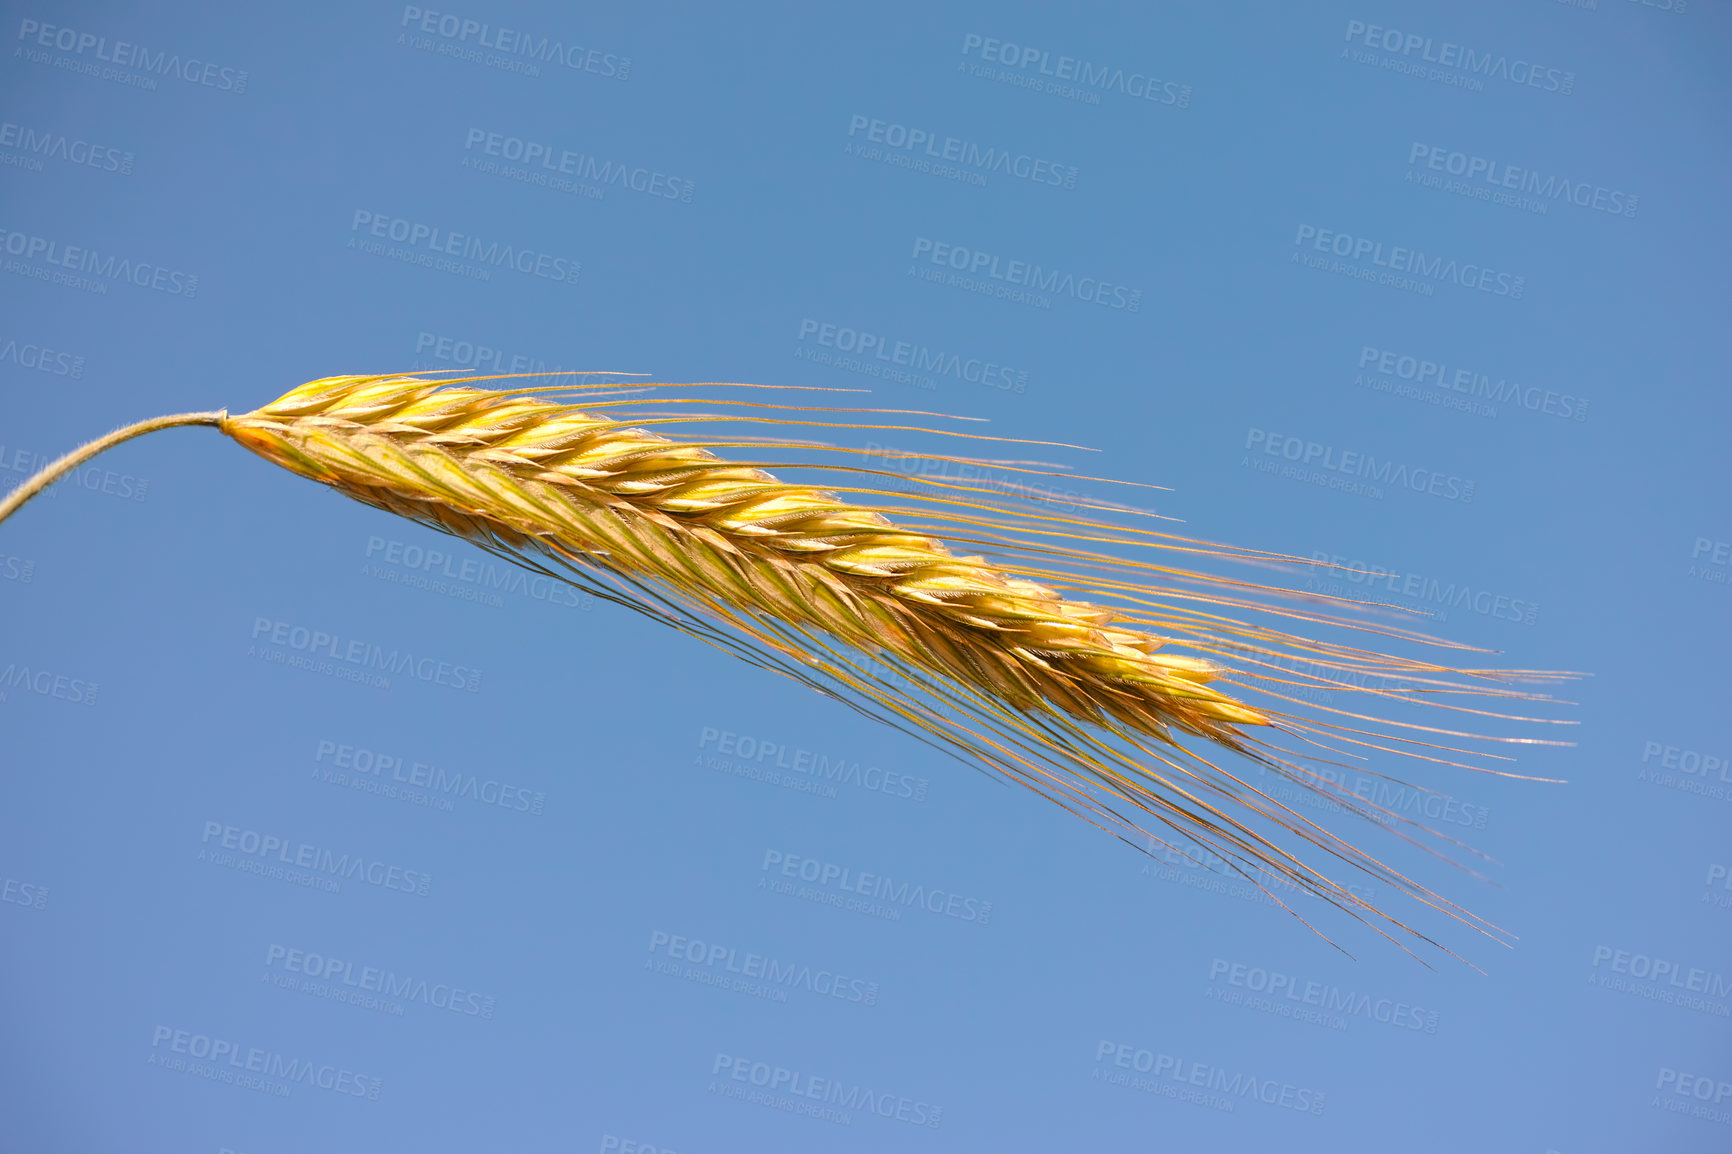 Buy stock photo Closeup of a head of wheat on a blue sky. Farming produce against a clear background. An ear of cultivated organic grain, dried maize or a barley spike. Kernels to be harvested blowing in the wind